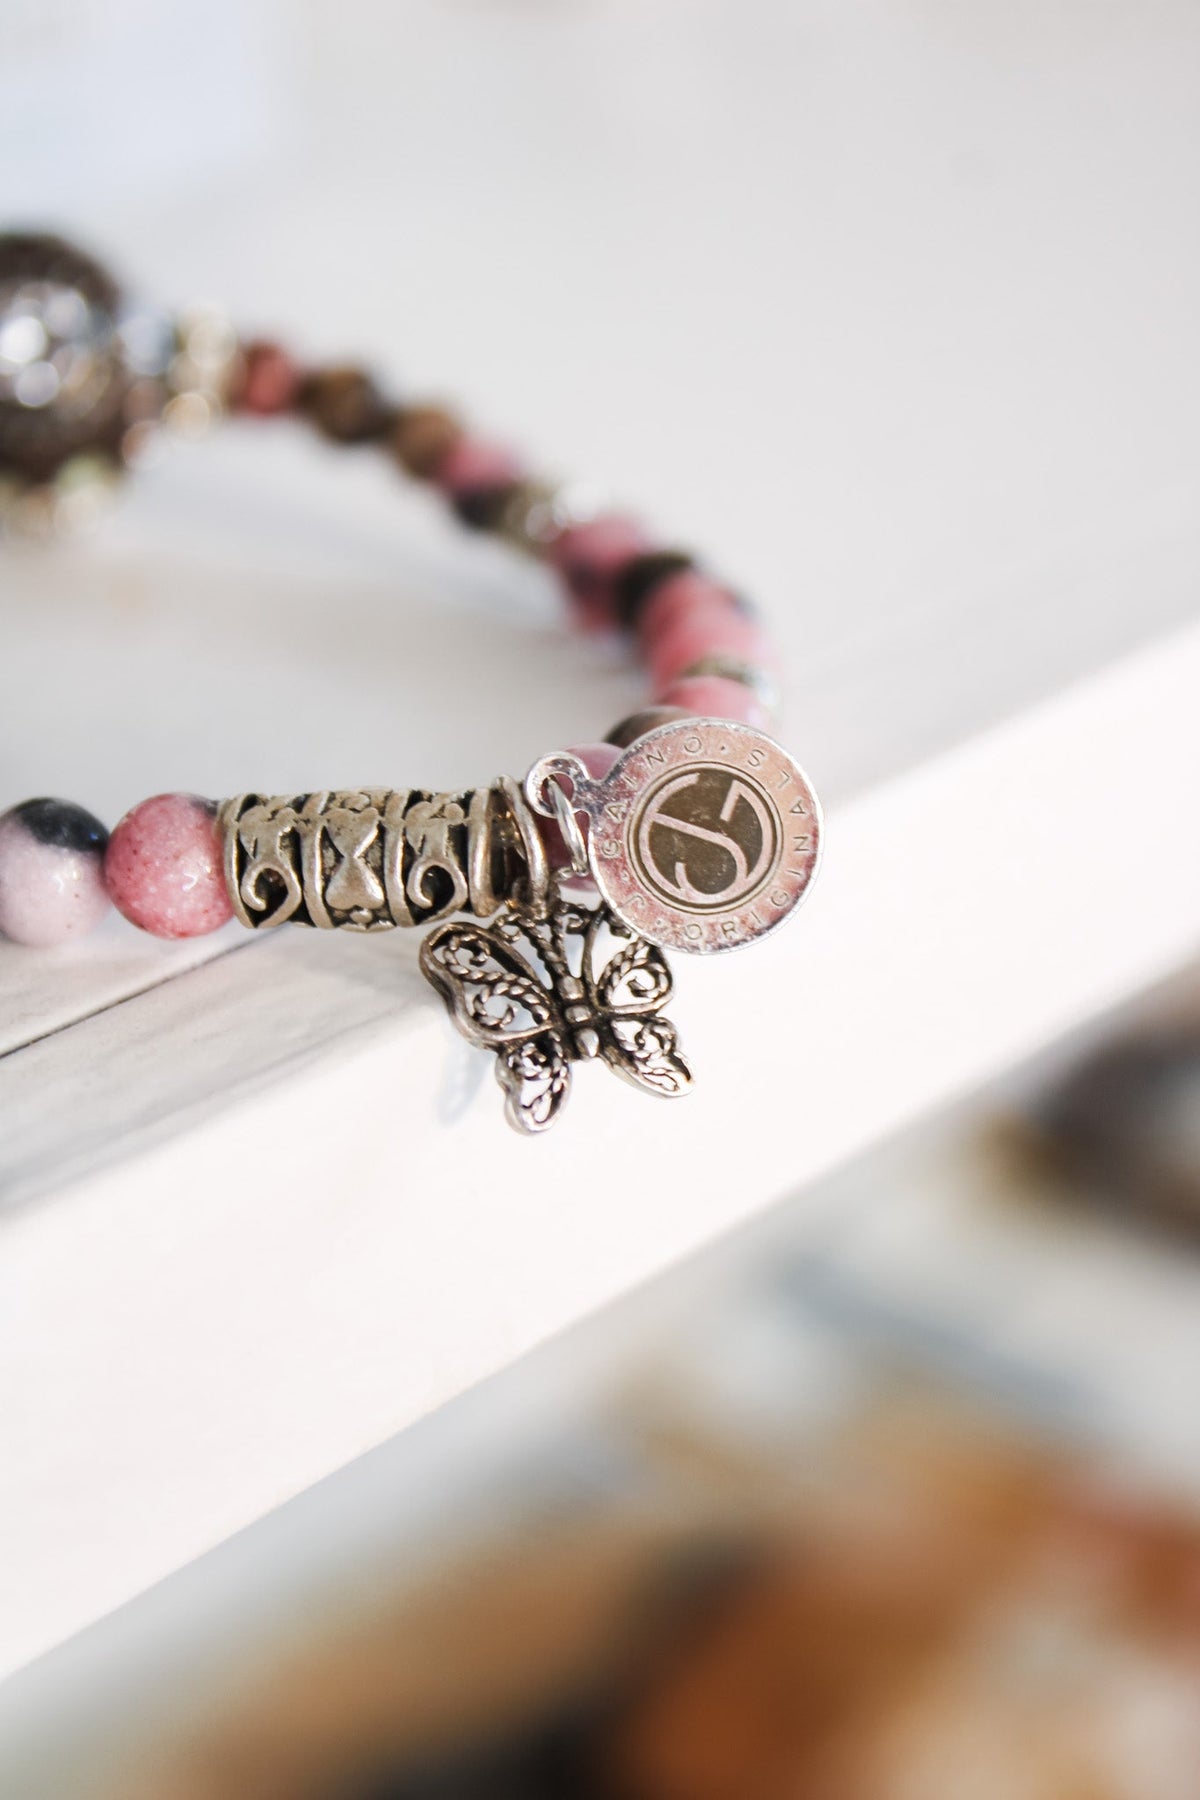 Build Your Own Gold & Rose Charm Bracelet, Handmade Jewelry